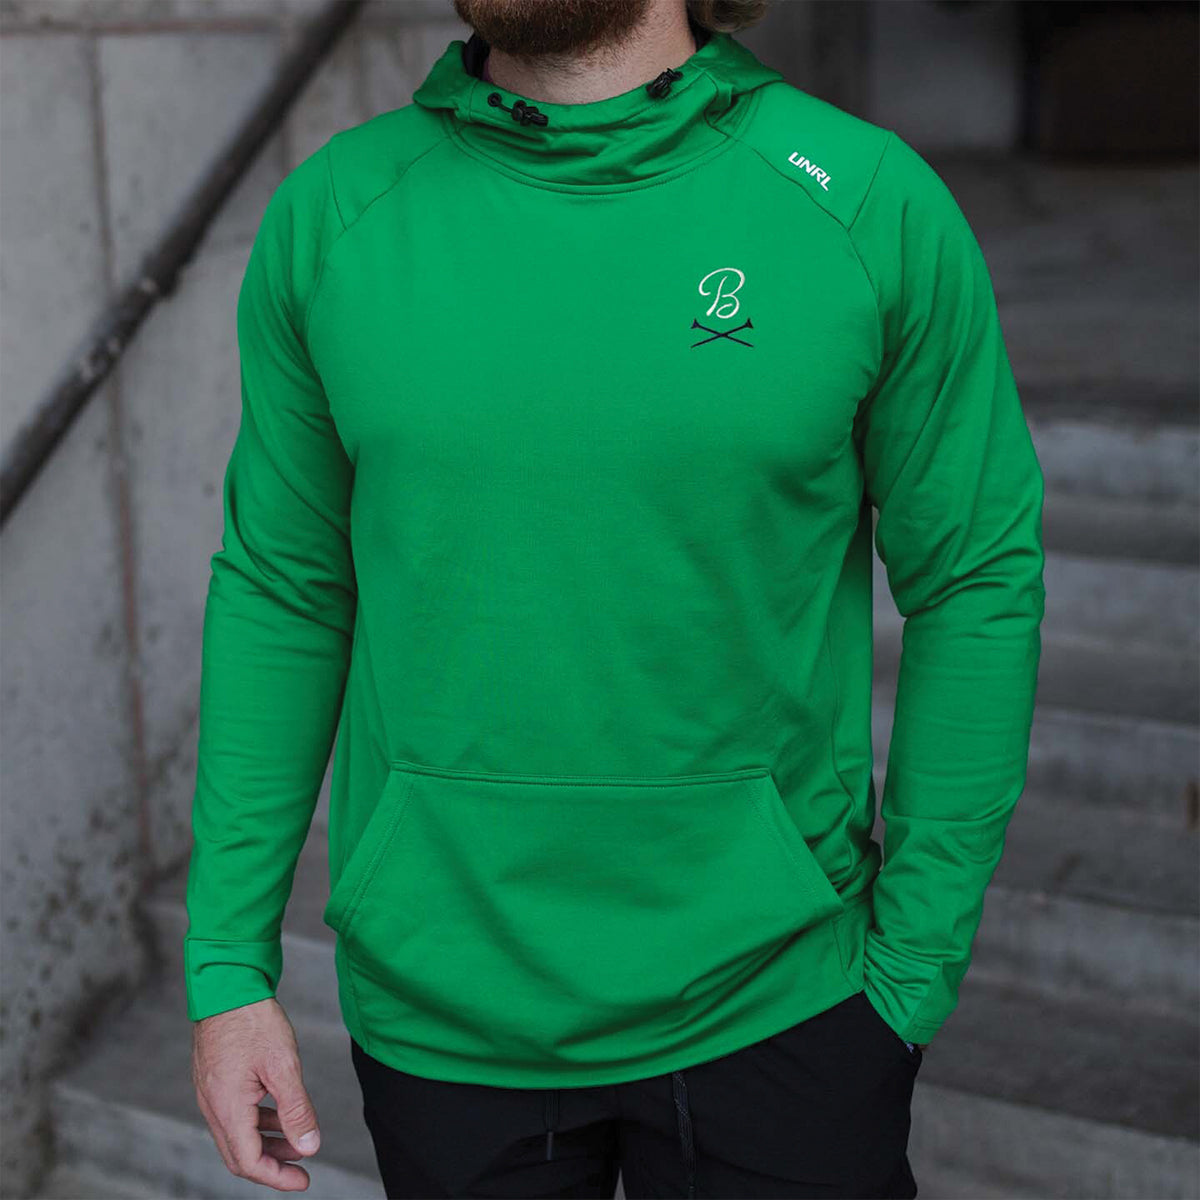 UNRL x Barstool Golf Green Crossover Hoodie II-Hoodies-Fore Play-Green-S-Barstool Sports